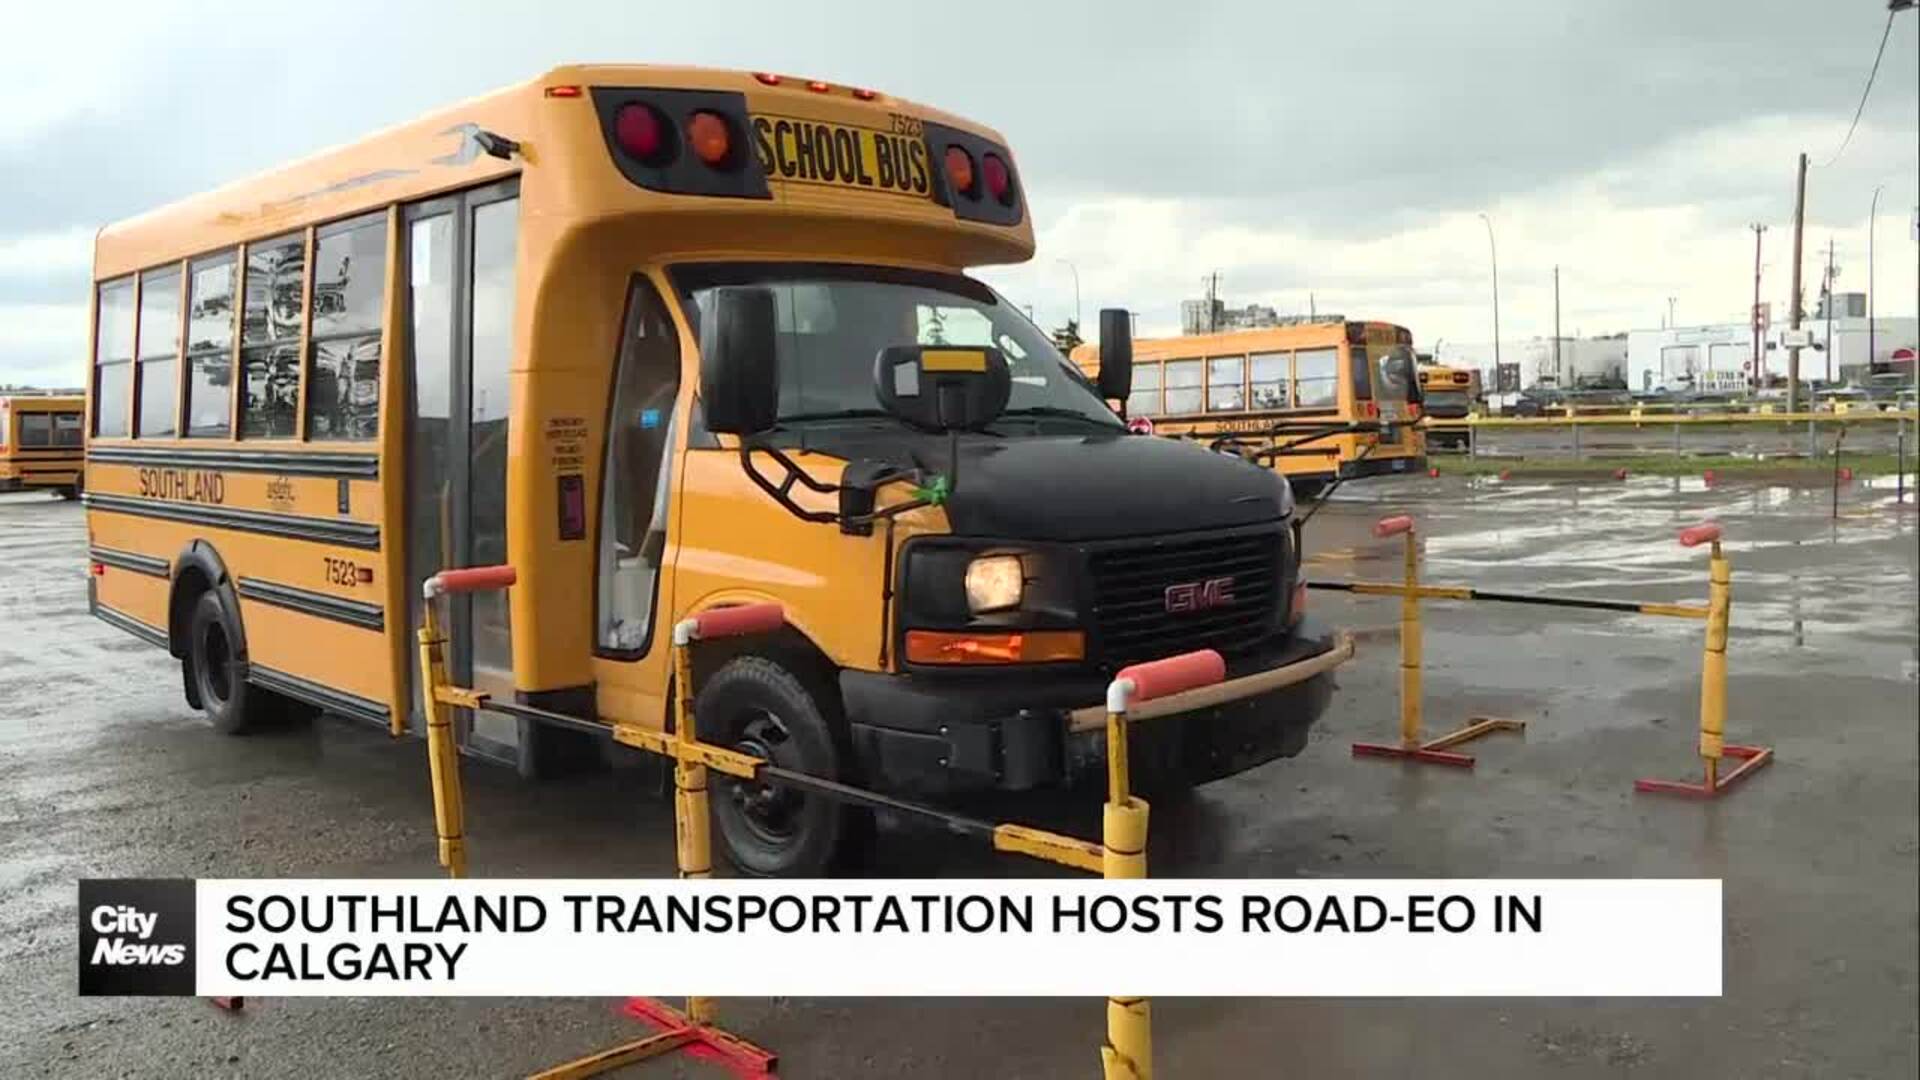 Southland Transportation hosts Road-eo in Calgary